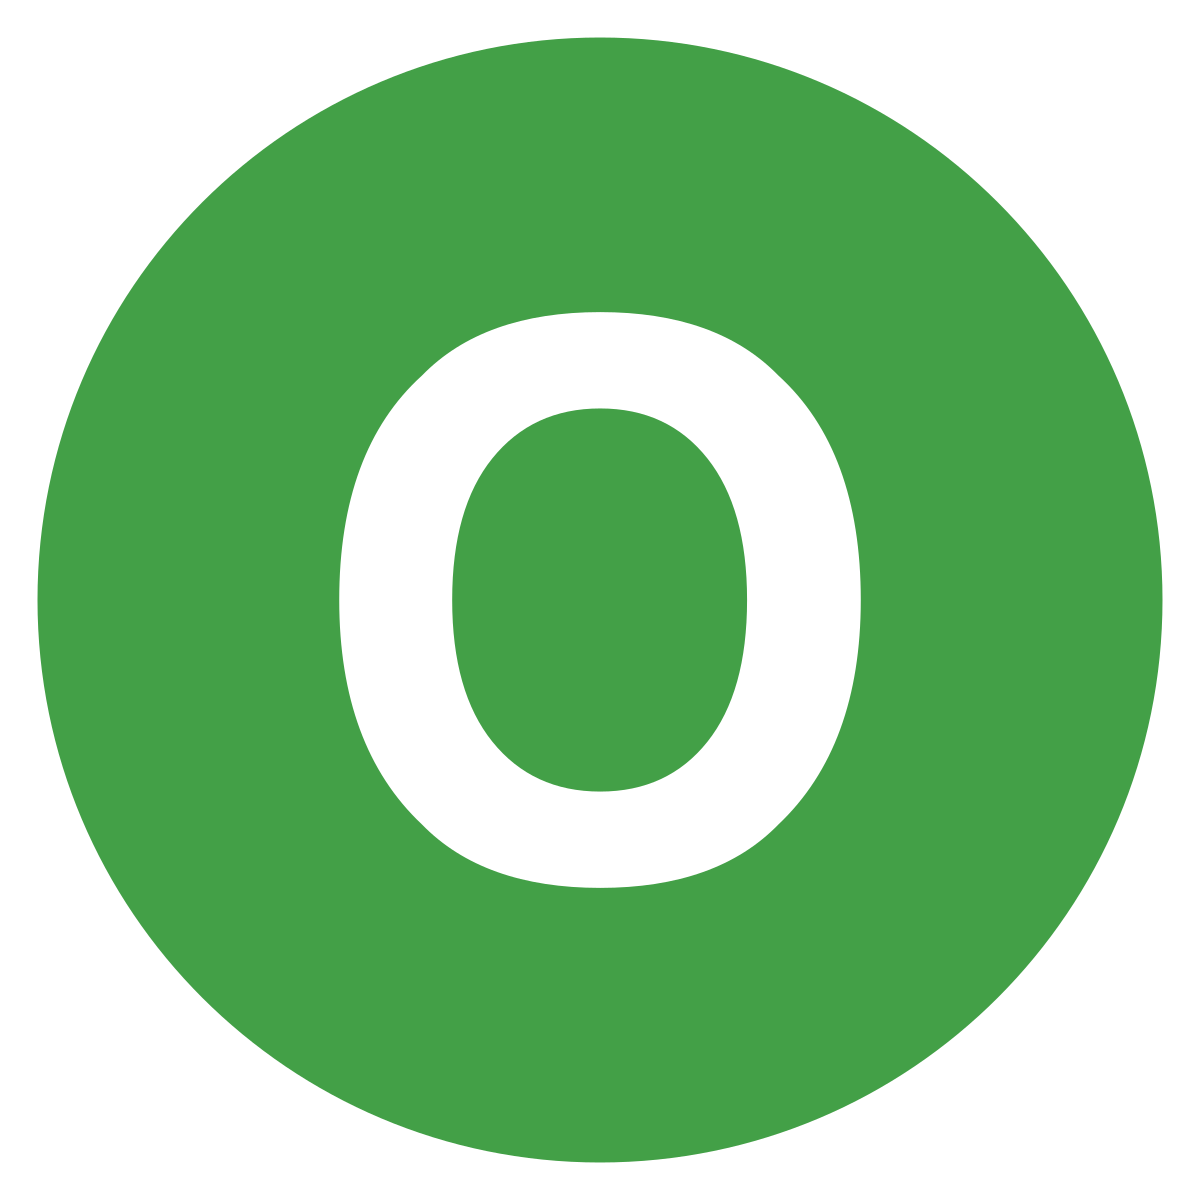 Download File:Eo circle green letter-o.svg - Wikimedia Commons